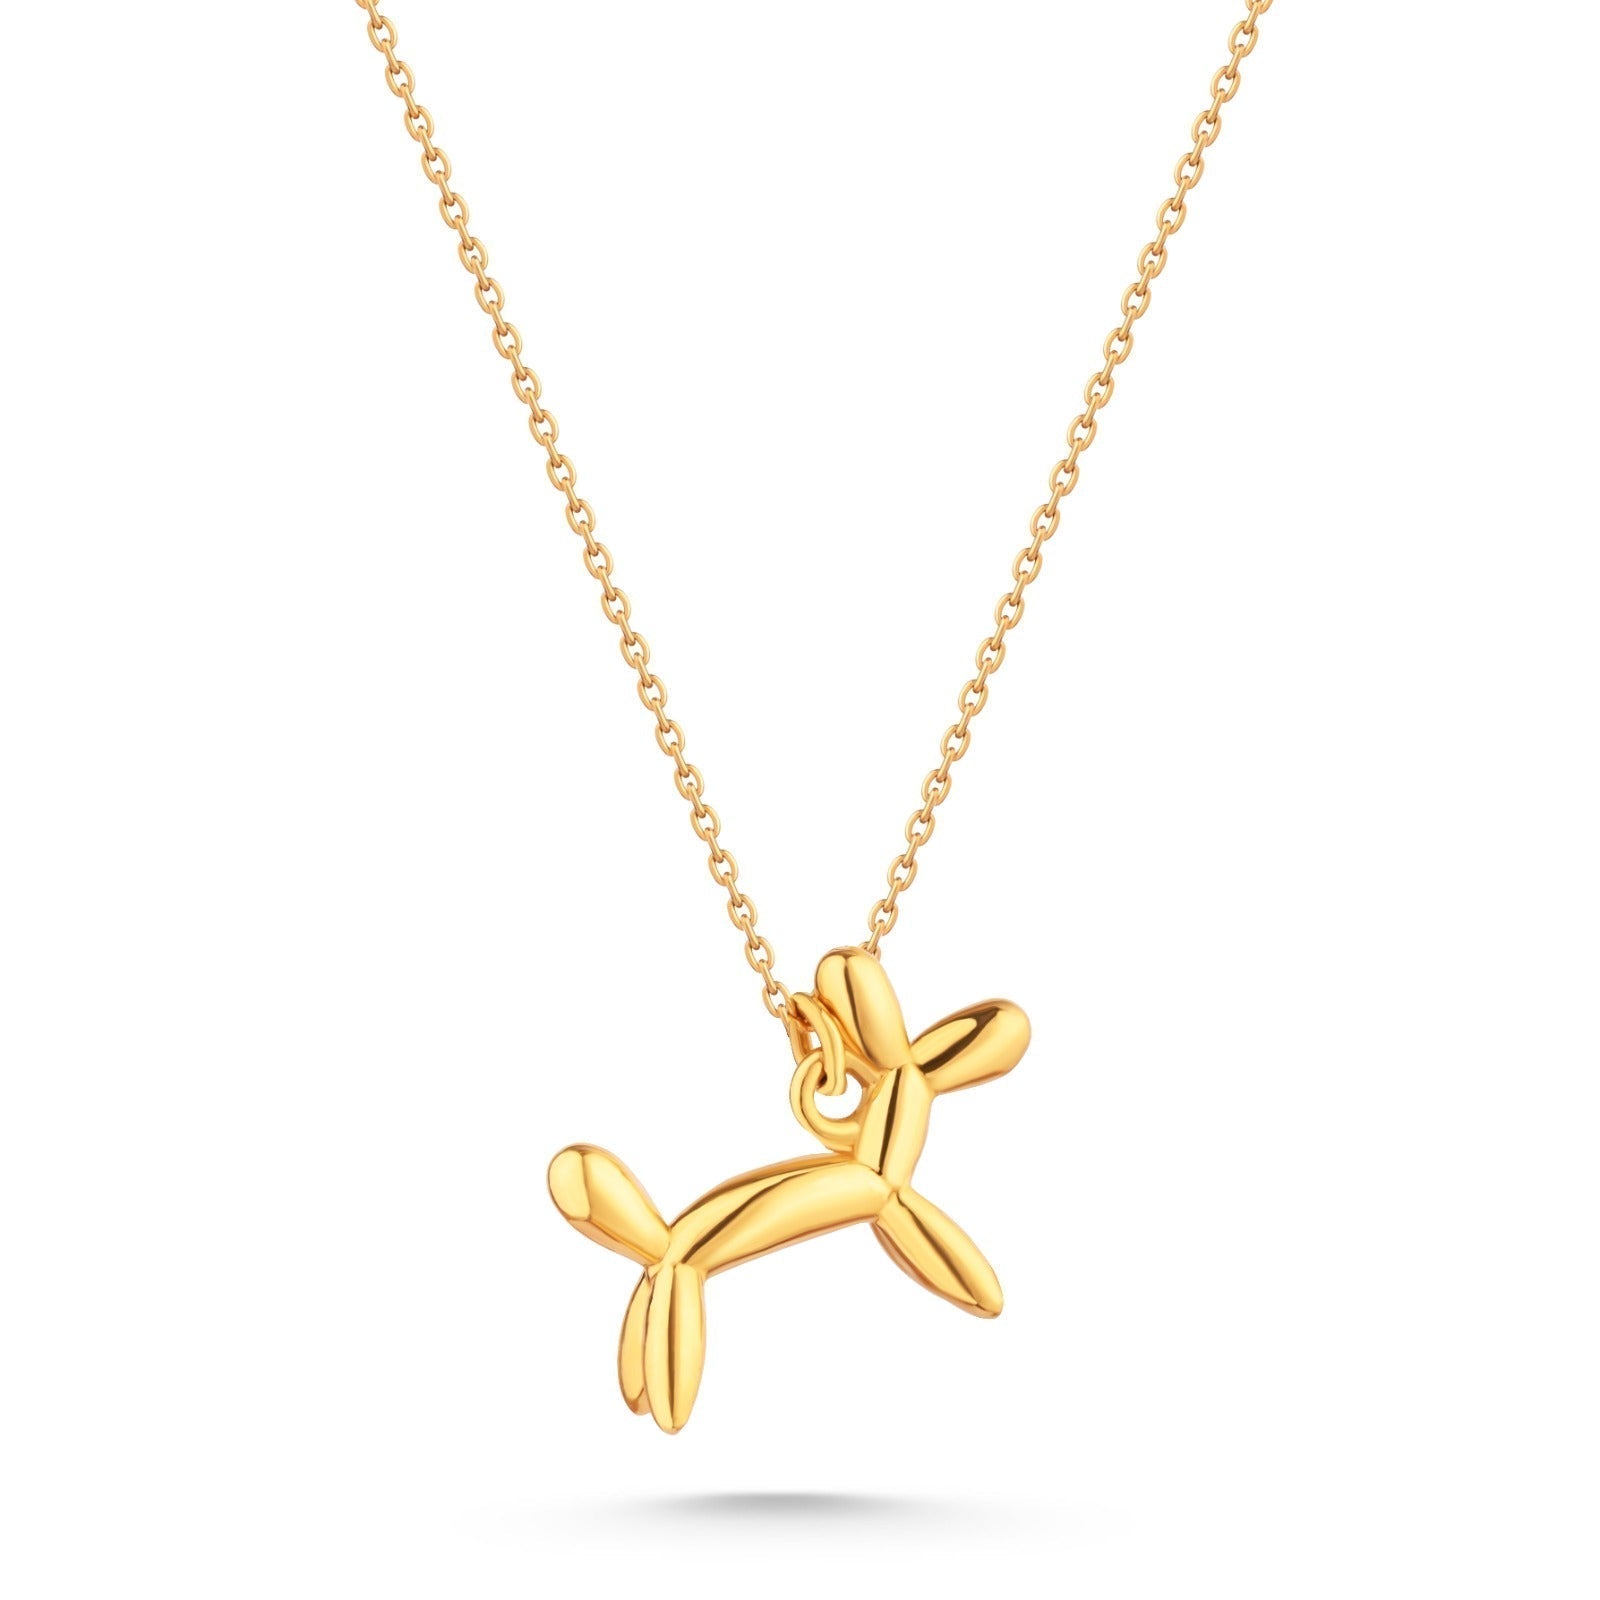 Balloon Dog in 18k Gold necklace